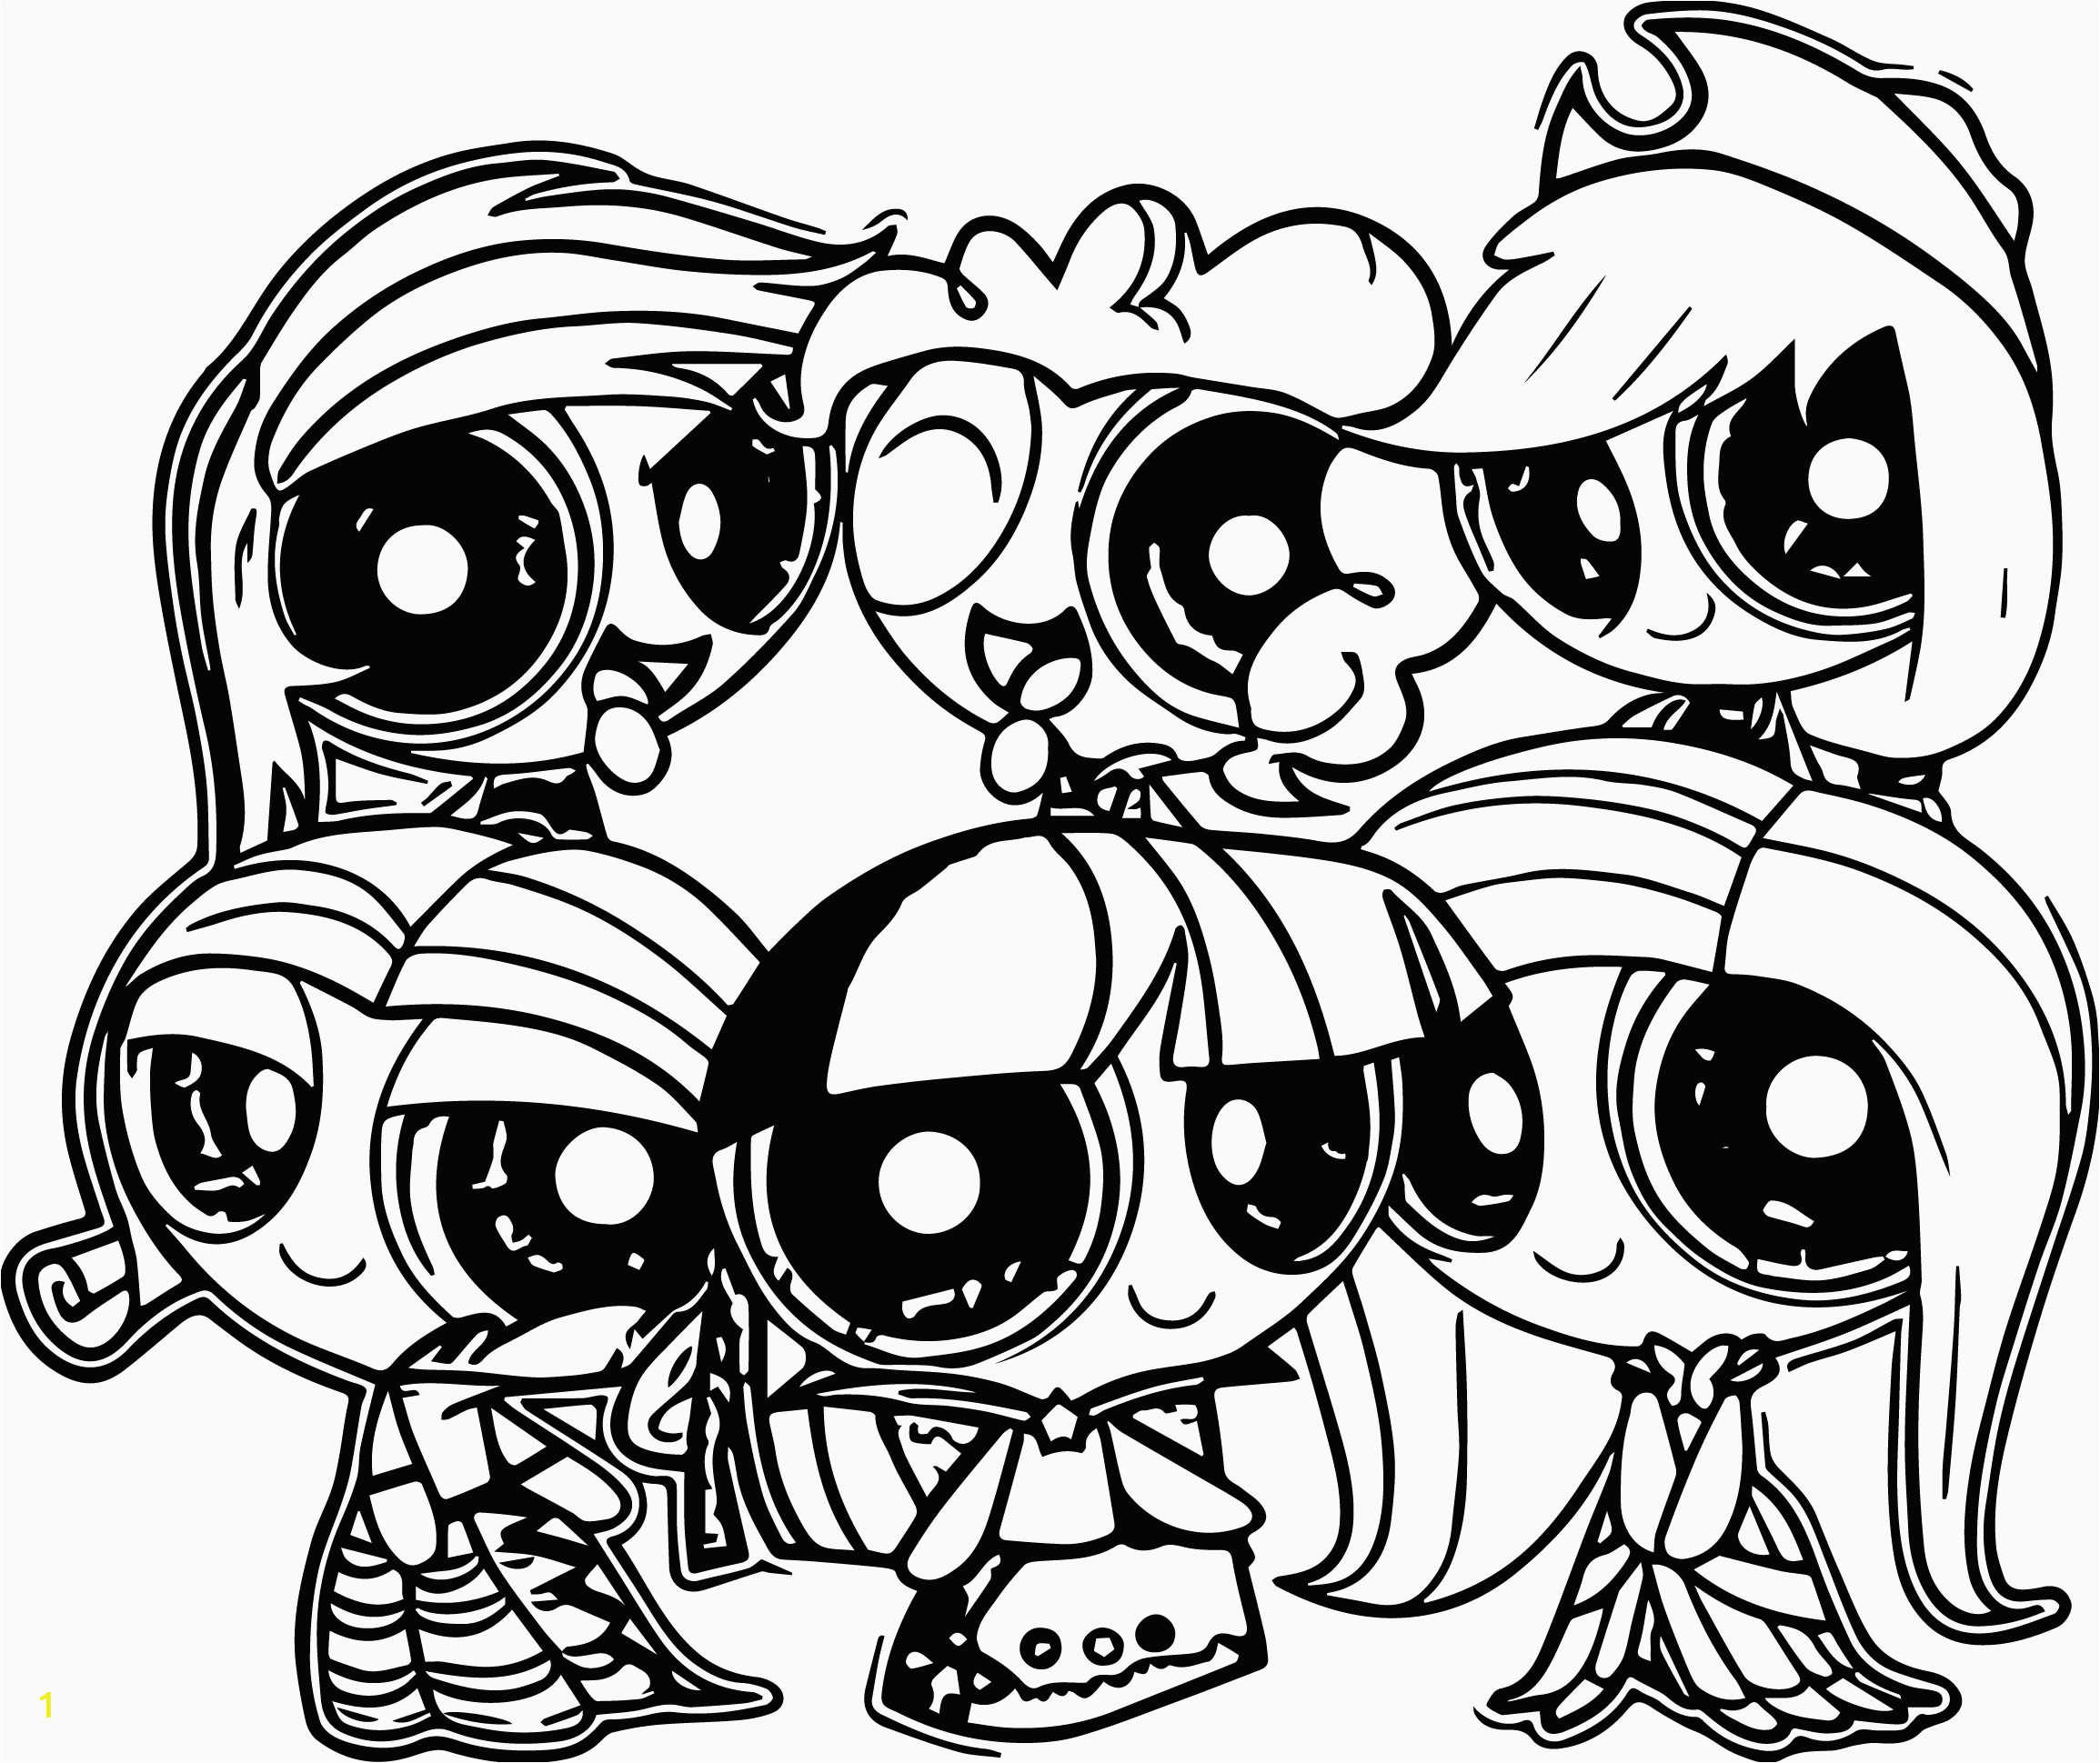 My Little Pony Coloring Pages Online My Little Pony Coloring Pages with All Ponies Coloring Home